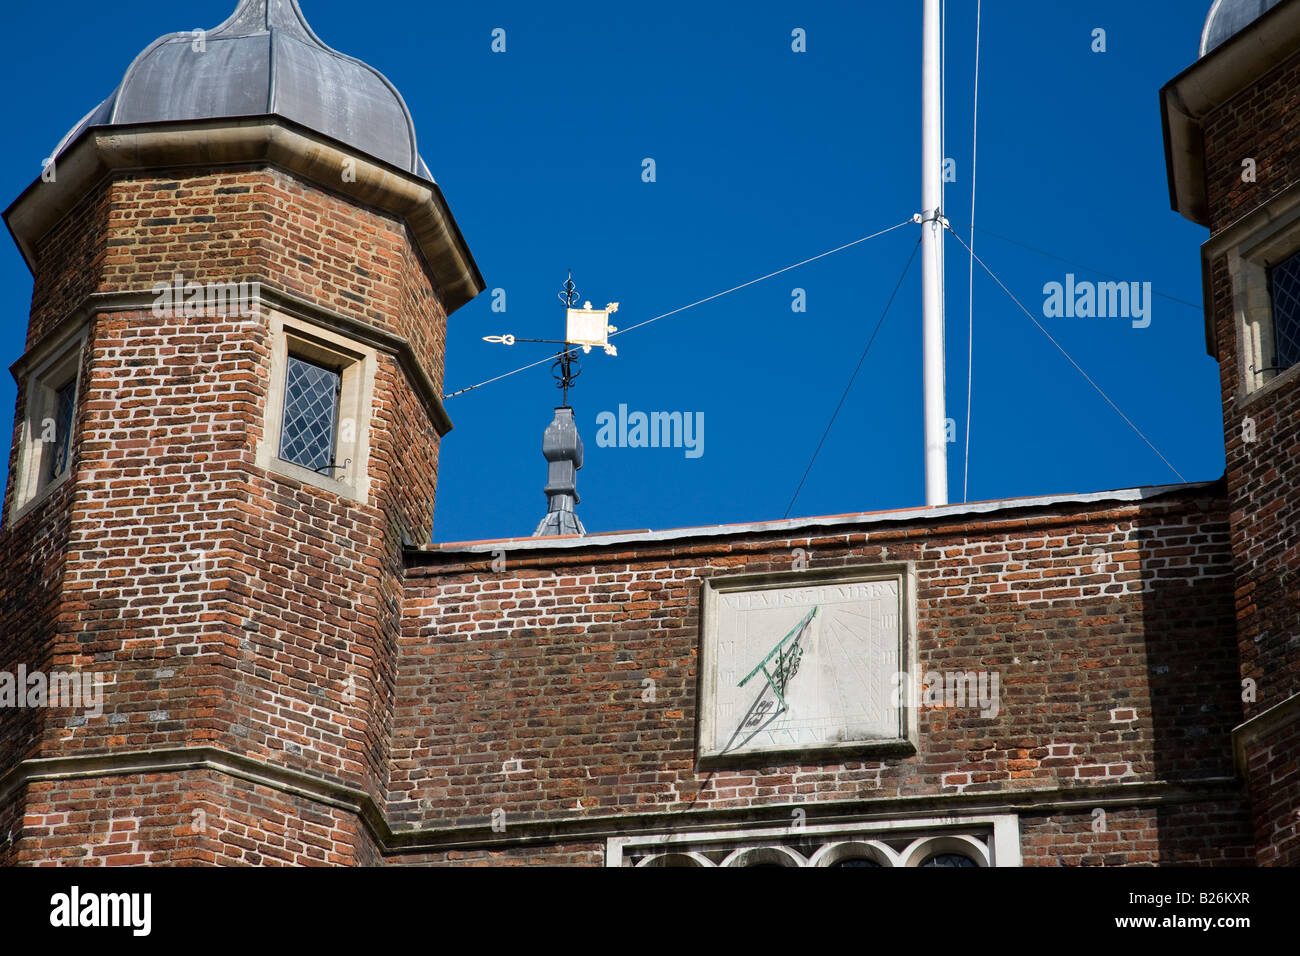 Part of the front of the Hospital of the Blessed Trinity or Abbot's Hospital, Guildford, Surrey, England. Stock Photo